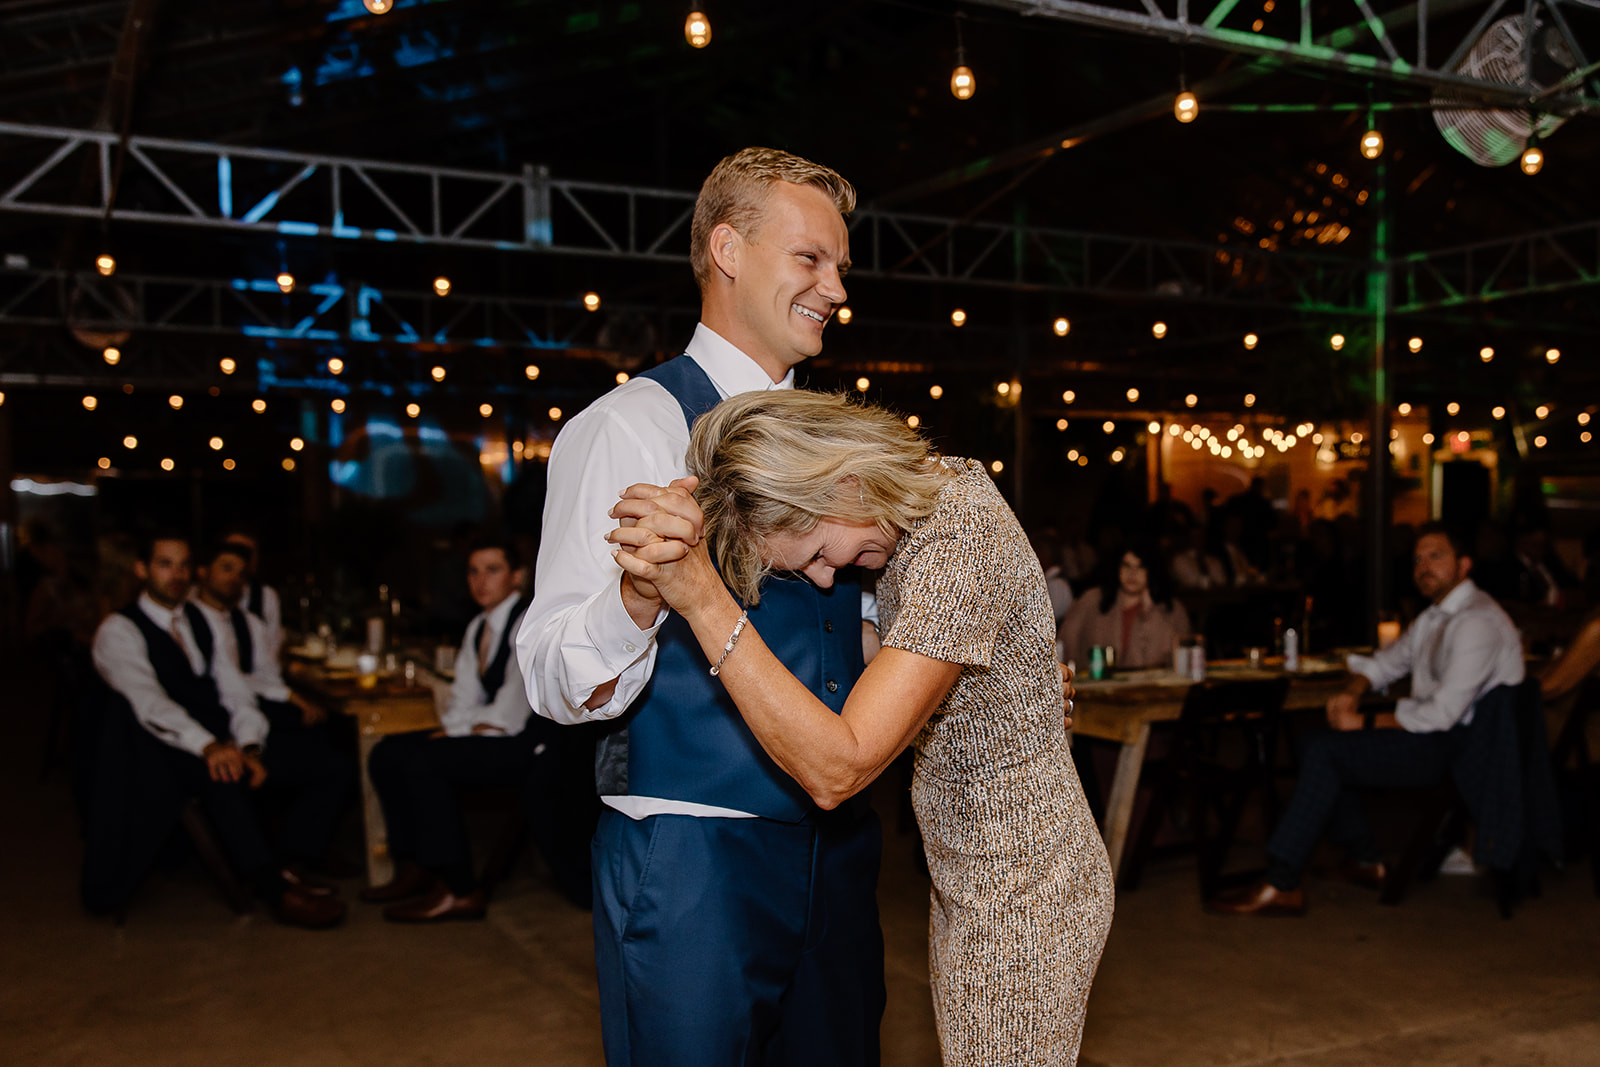 Groom and mother dance during wedding reception